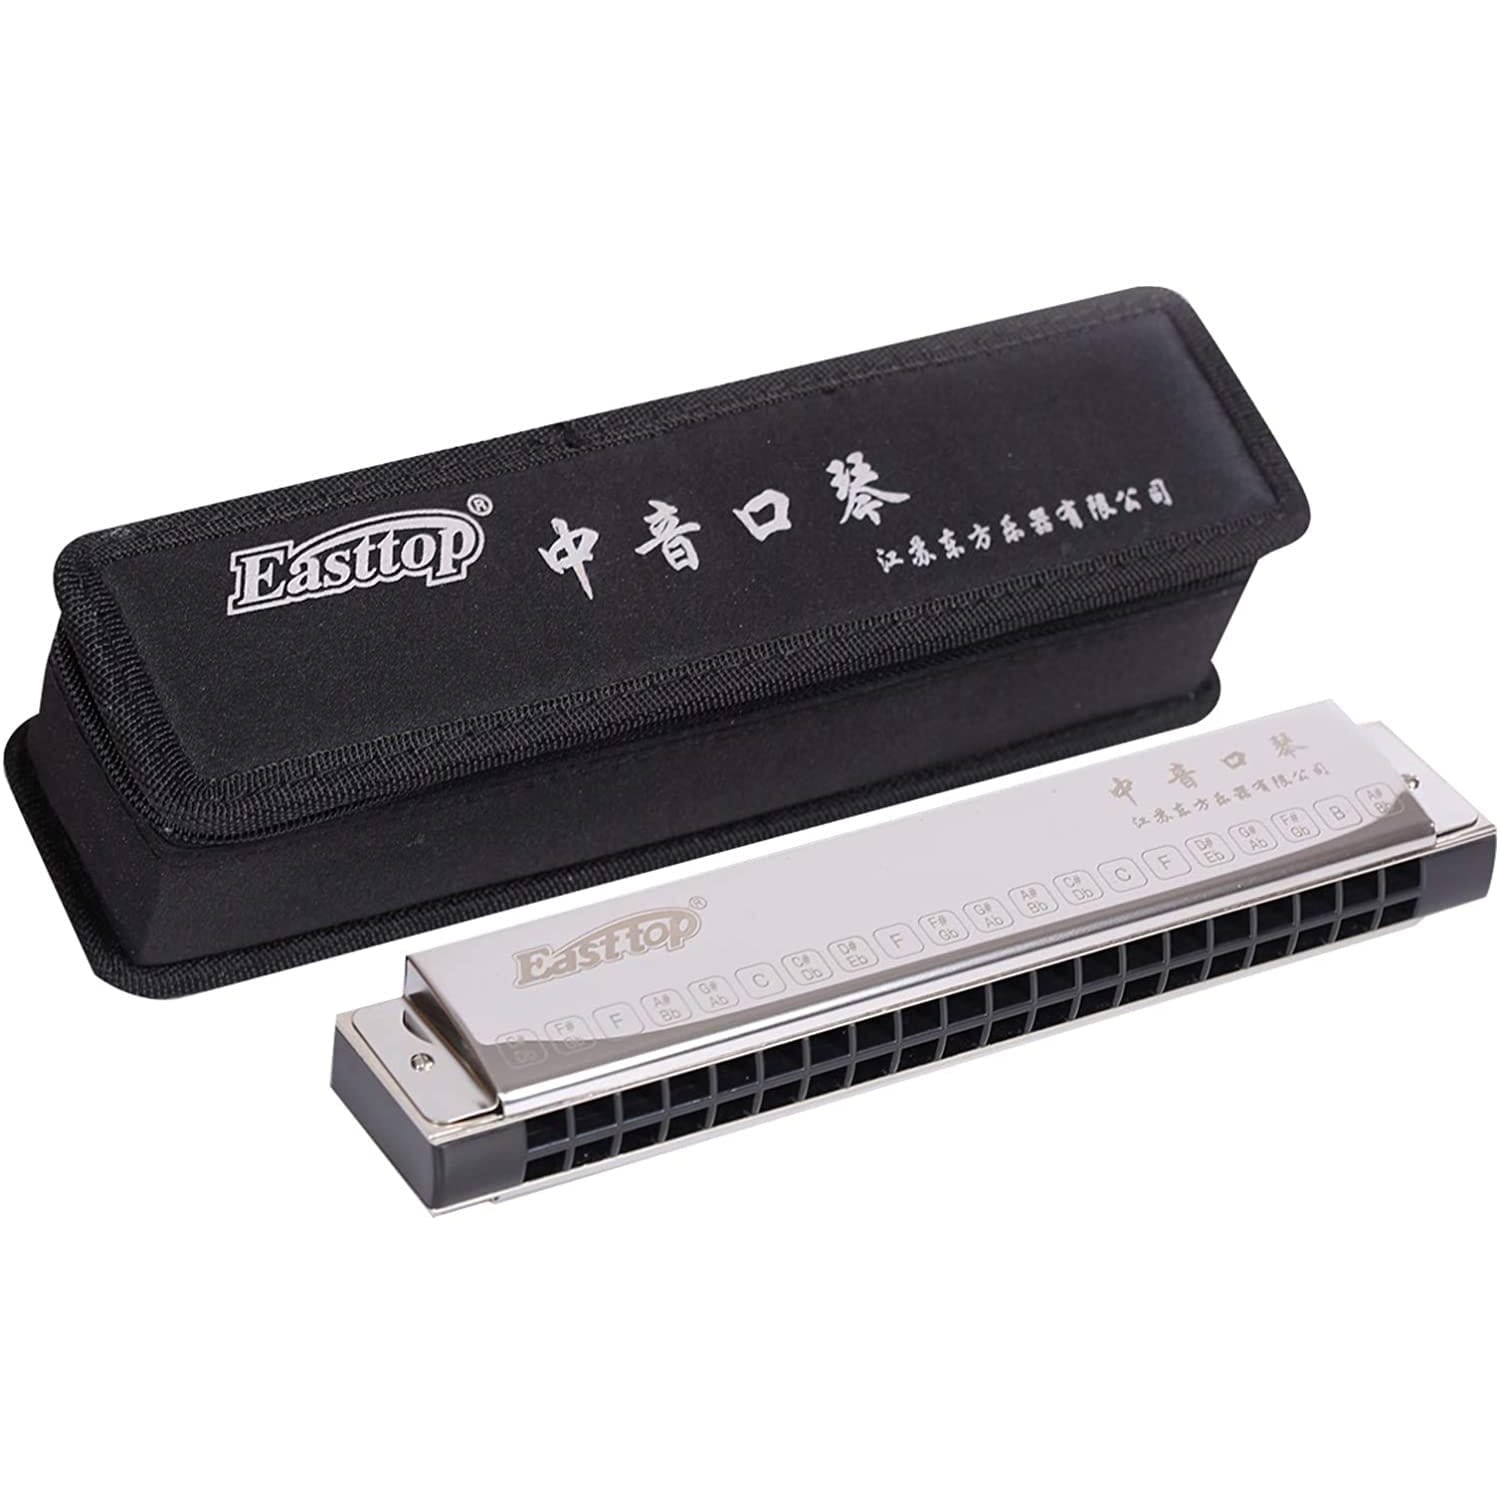 East top Mediant Harmonica, Orchestral Harmonica Harmoncia For Adults, Professional Band Player and Students - Easttop harmonica